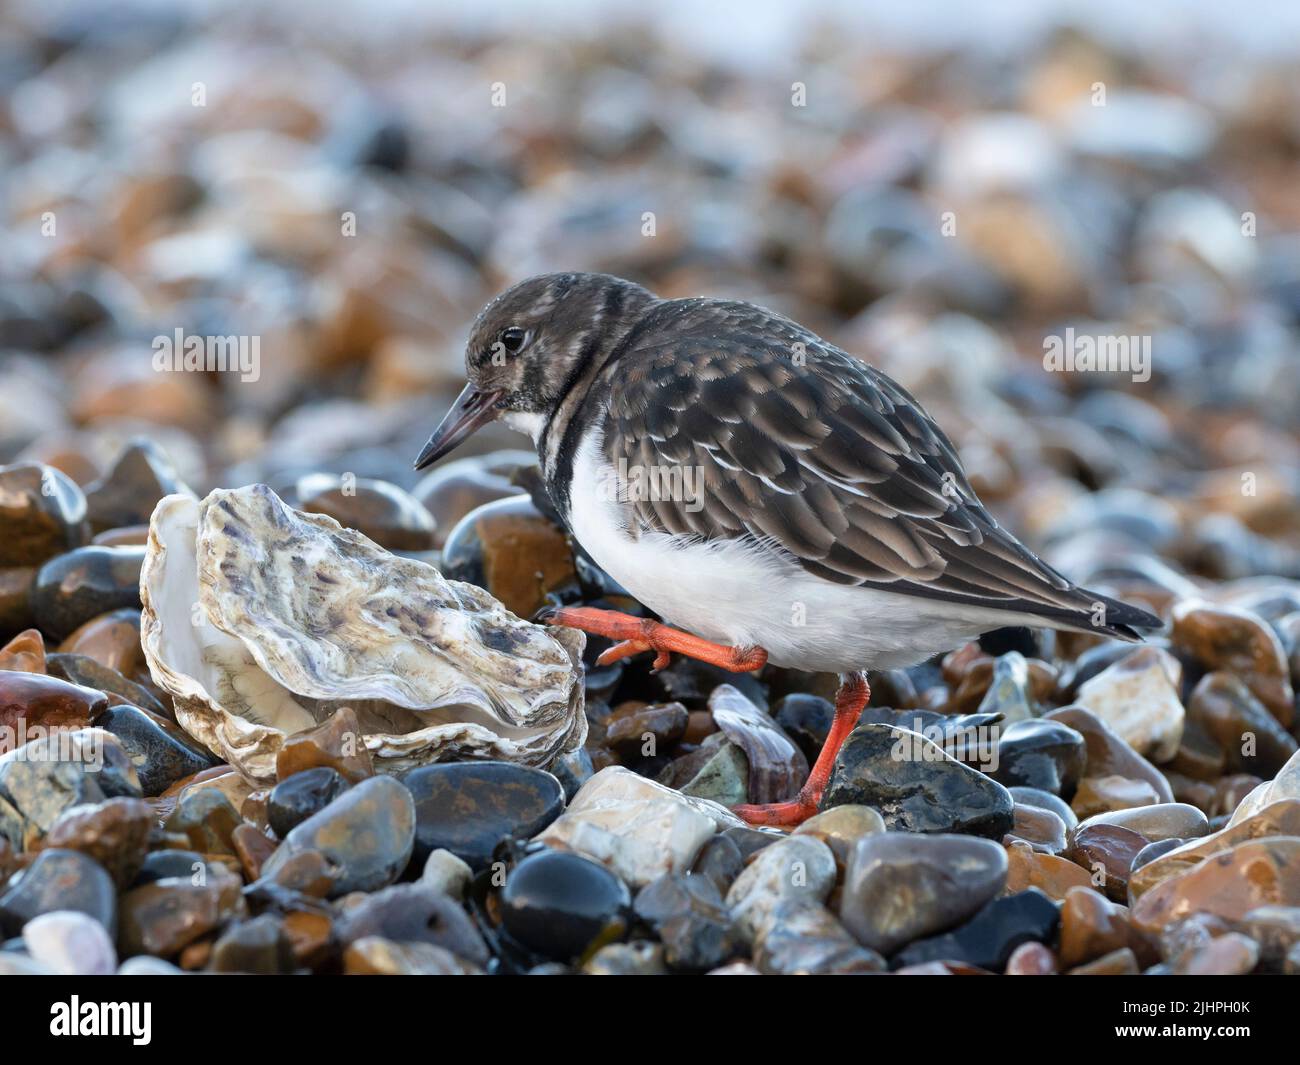 Ruddy turnstone (Arenaria interpres) turning discarded Oyster Shells on shingle beach, Whitstable, Kent UK, Turnstones can flip rocks almost as heavy Stock Photo